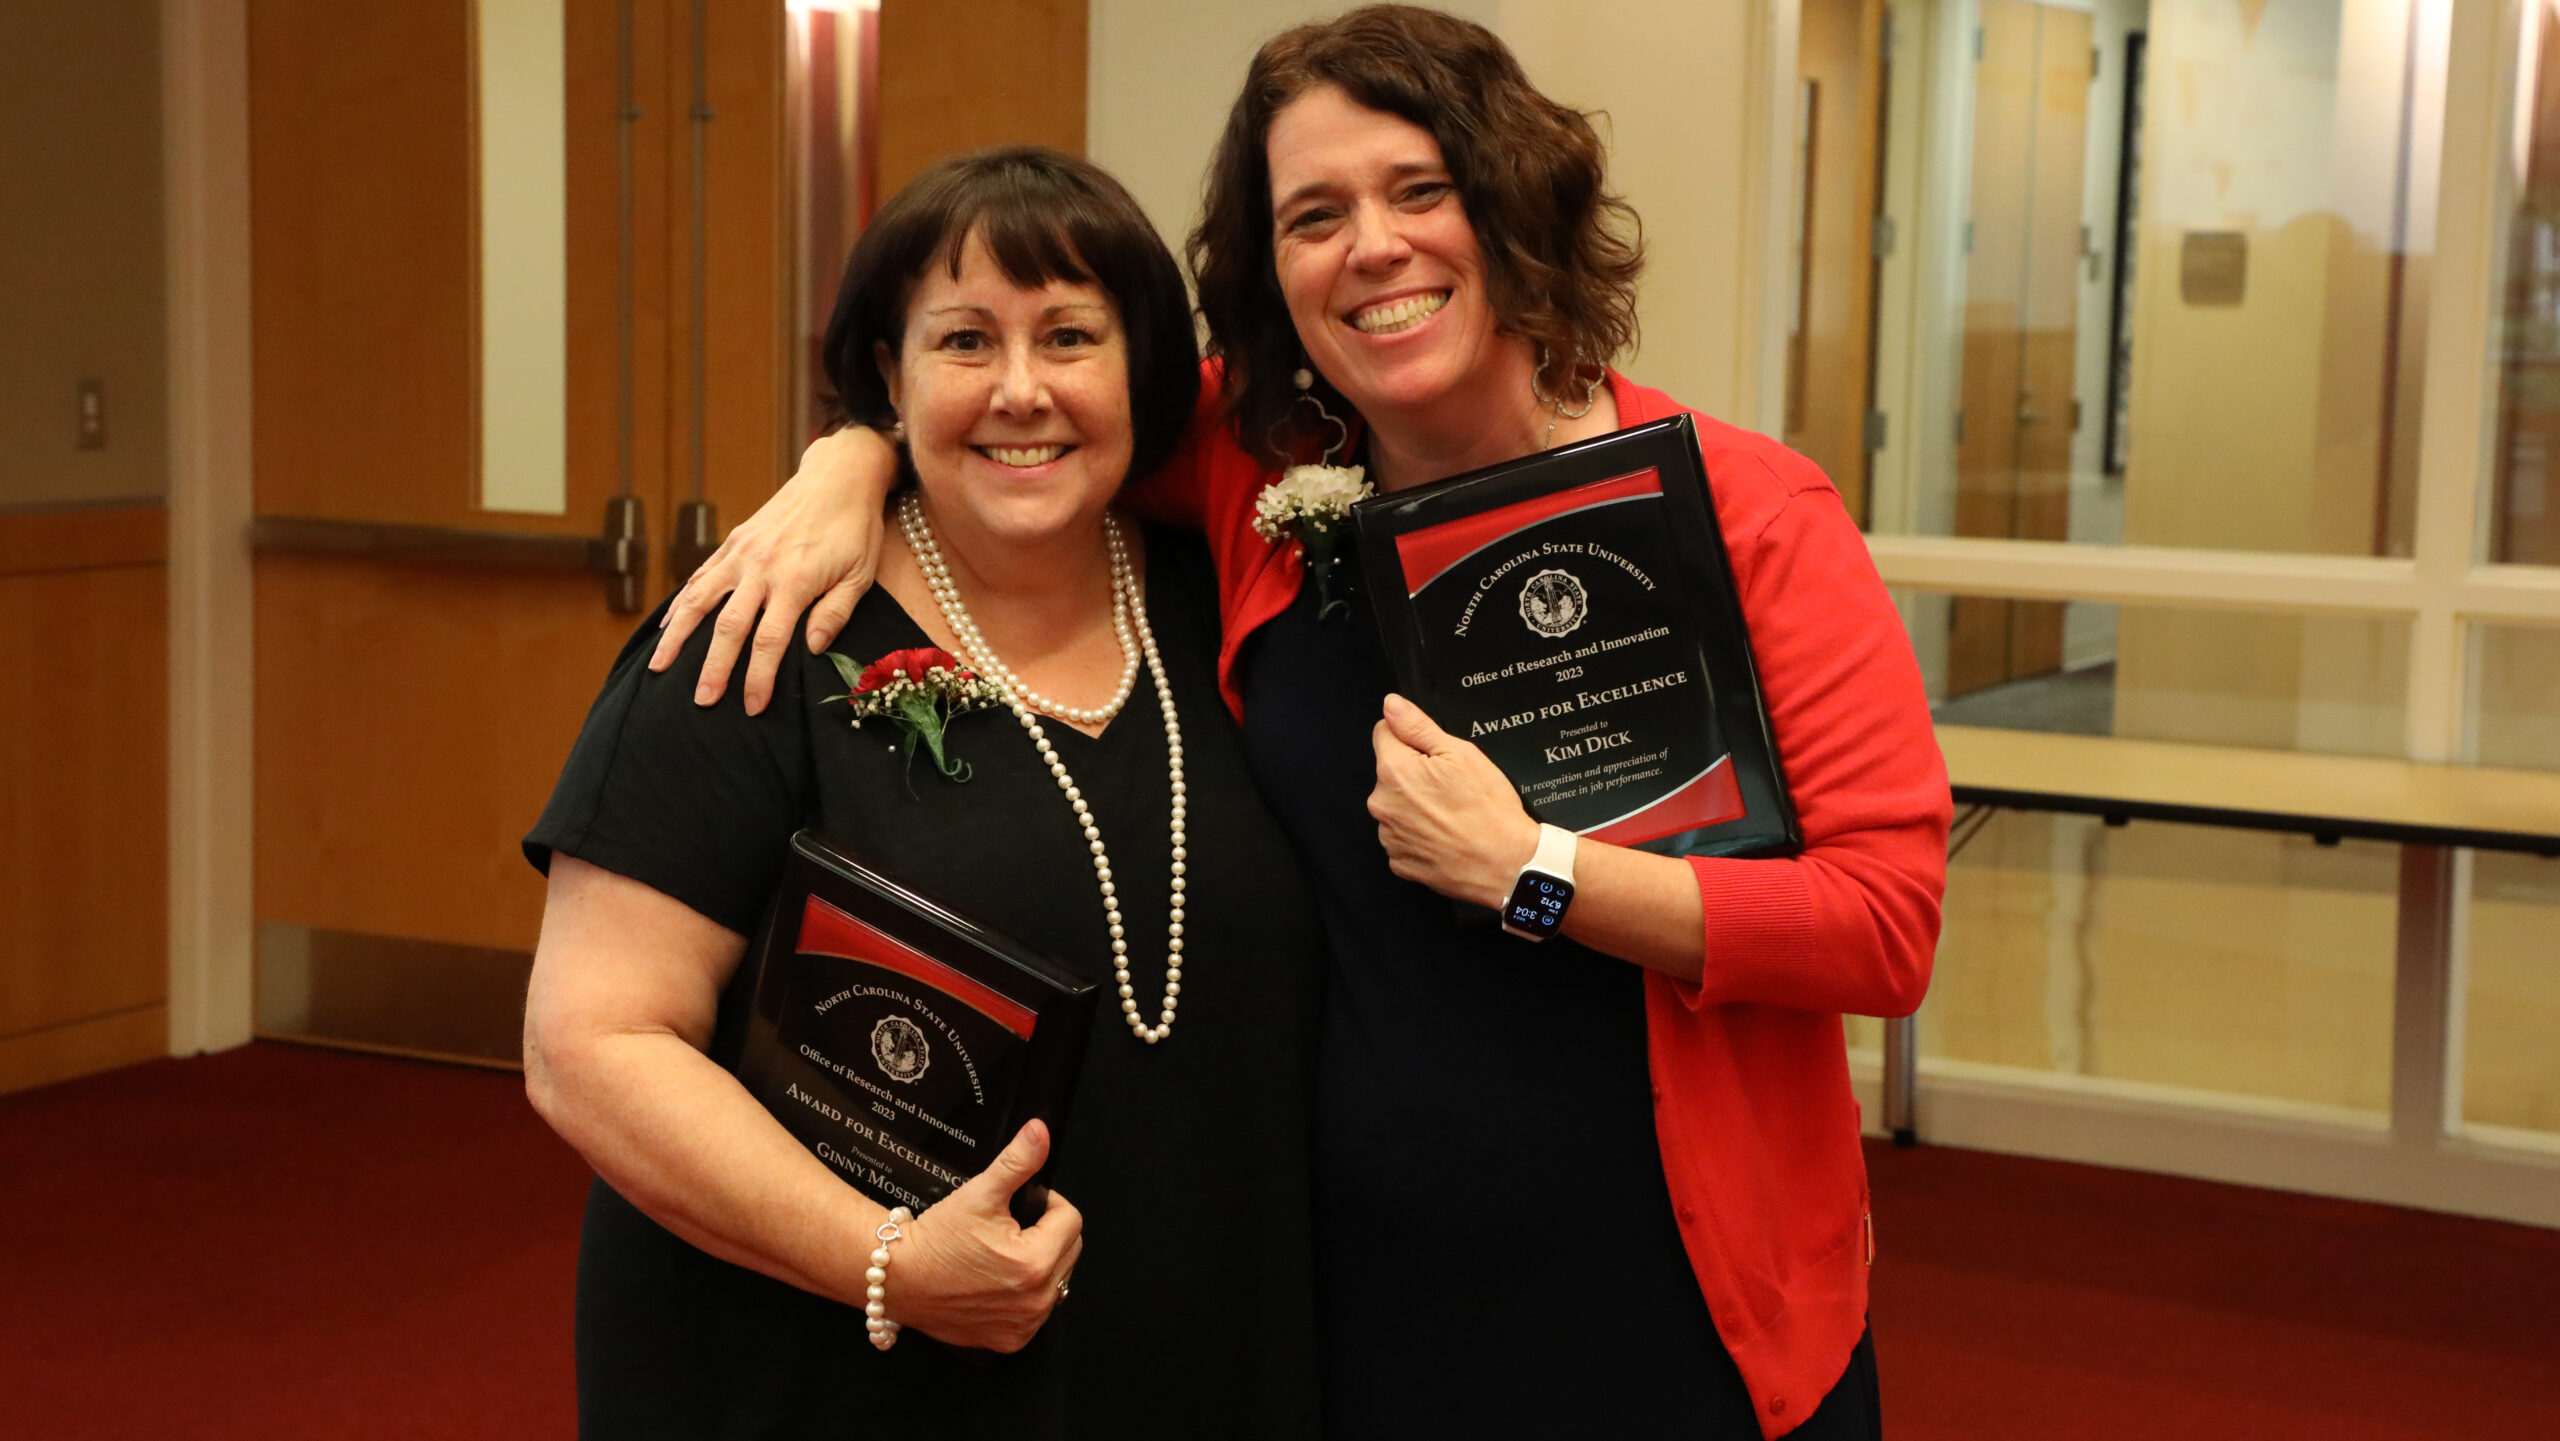 Ginny Moser and Kim Dick pose with the plaques they received as winners of ORI's 2023 Award for Excellence.